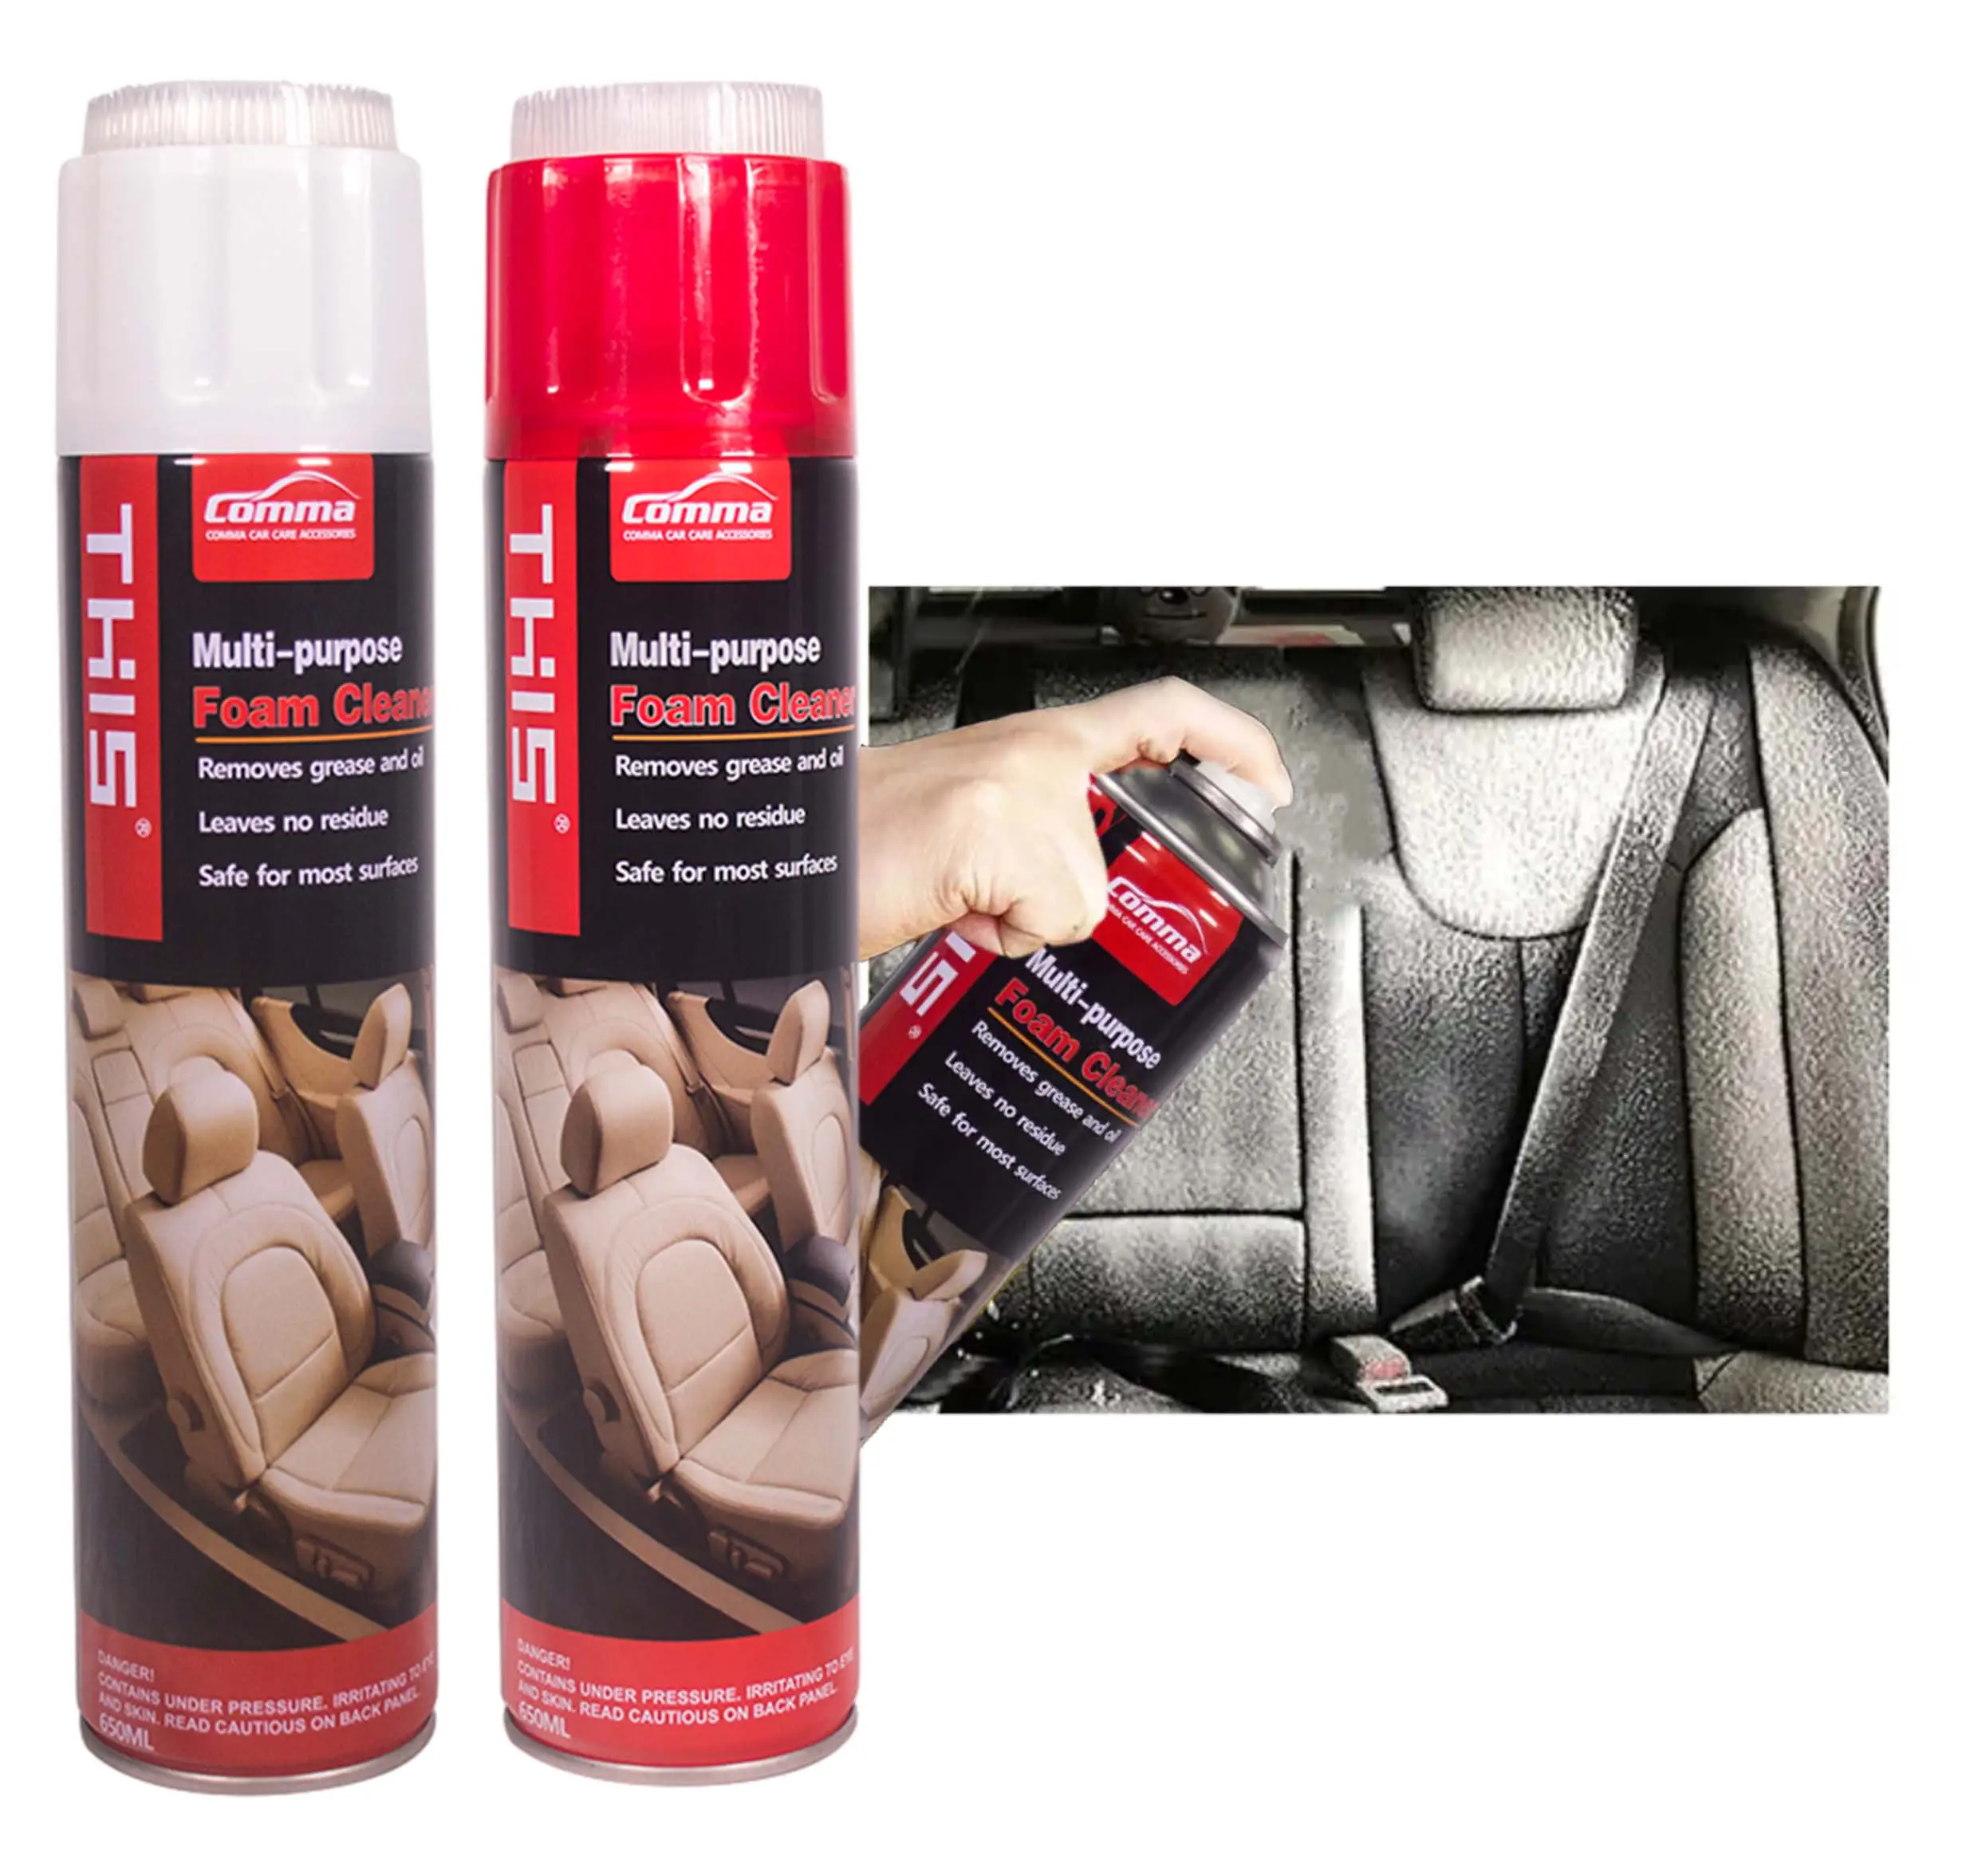 Multi-purpose Best for cleaning seat vehicle interior care cleaning foam cleaner